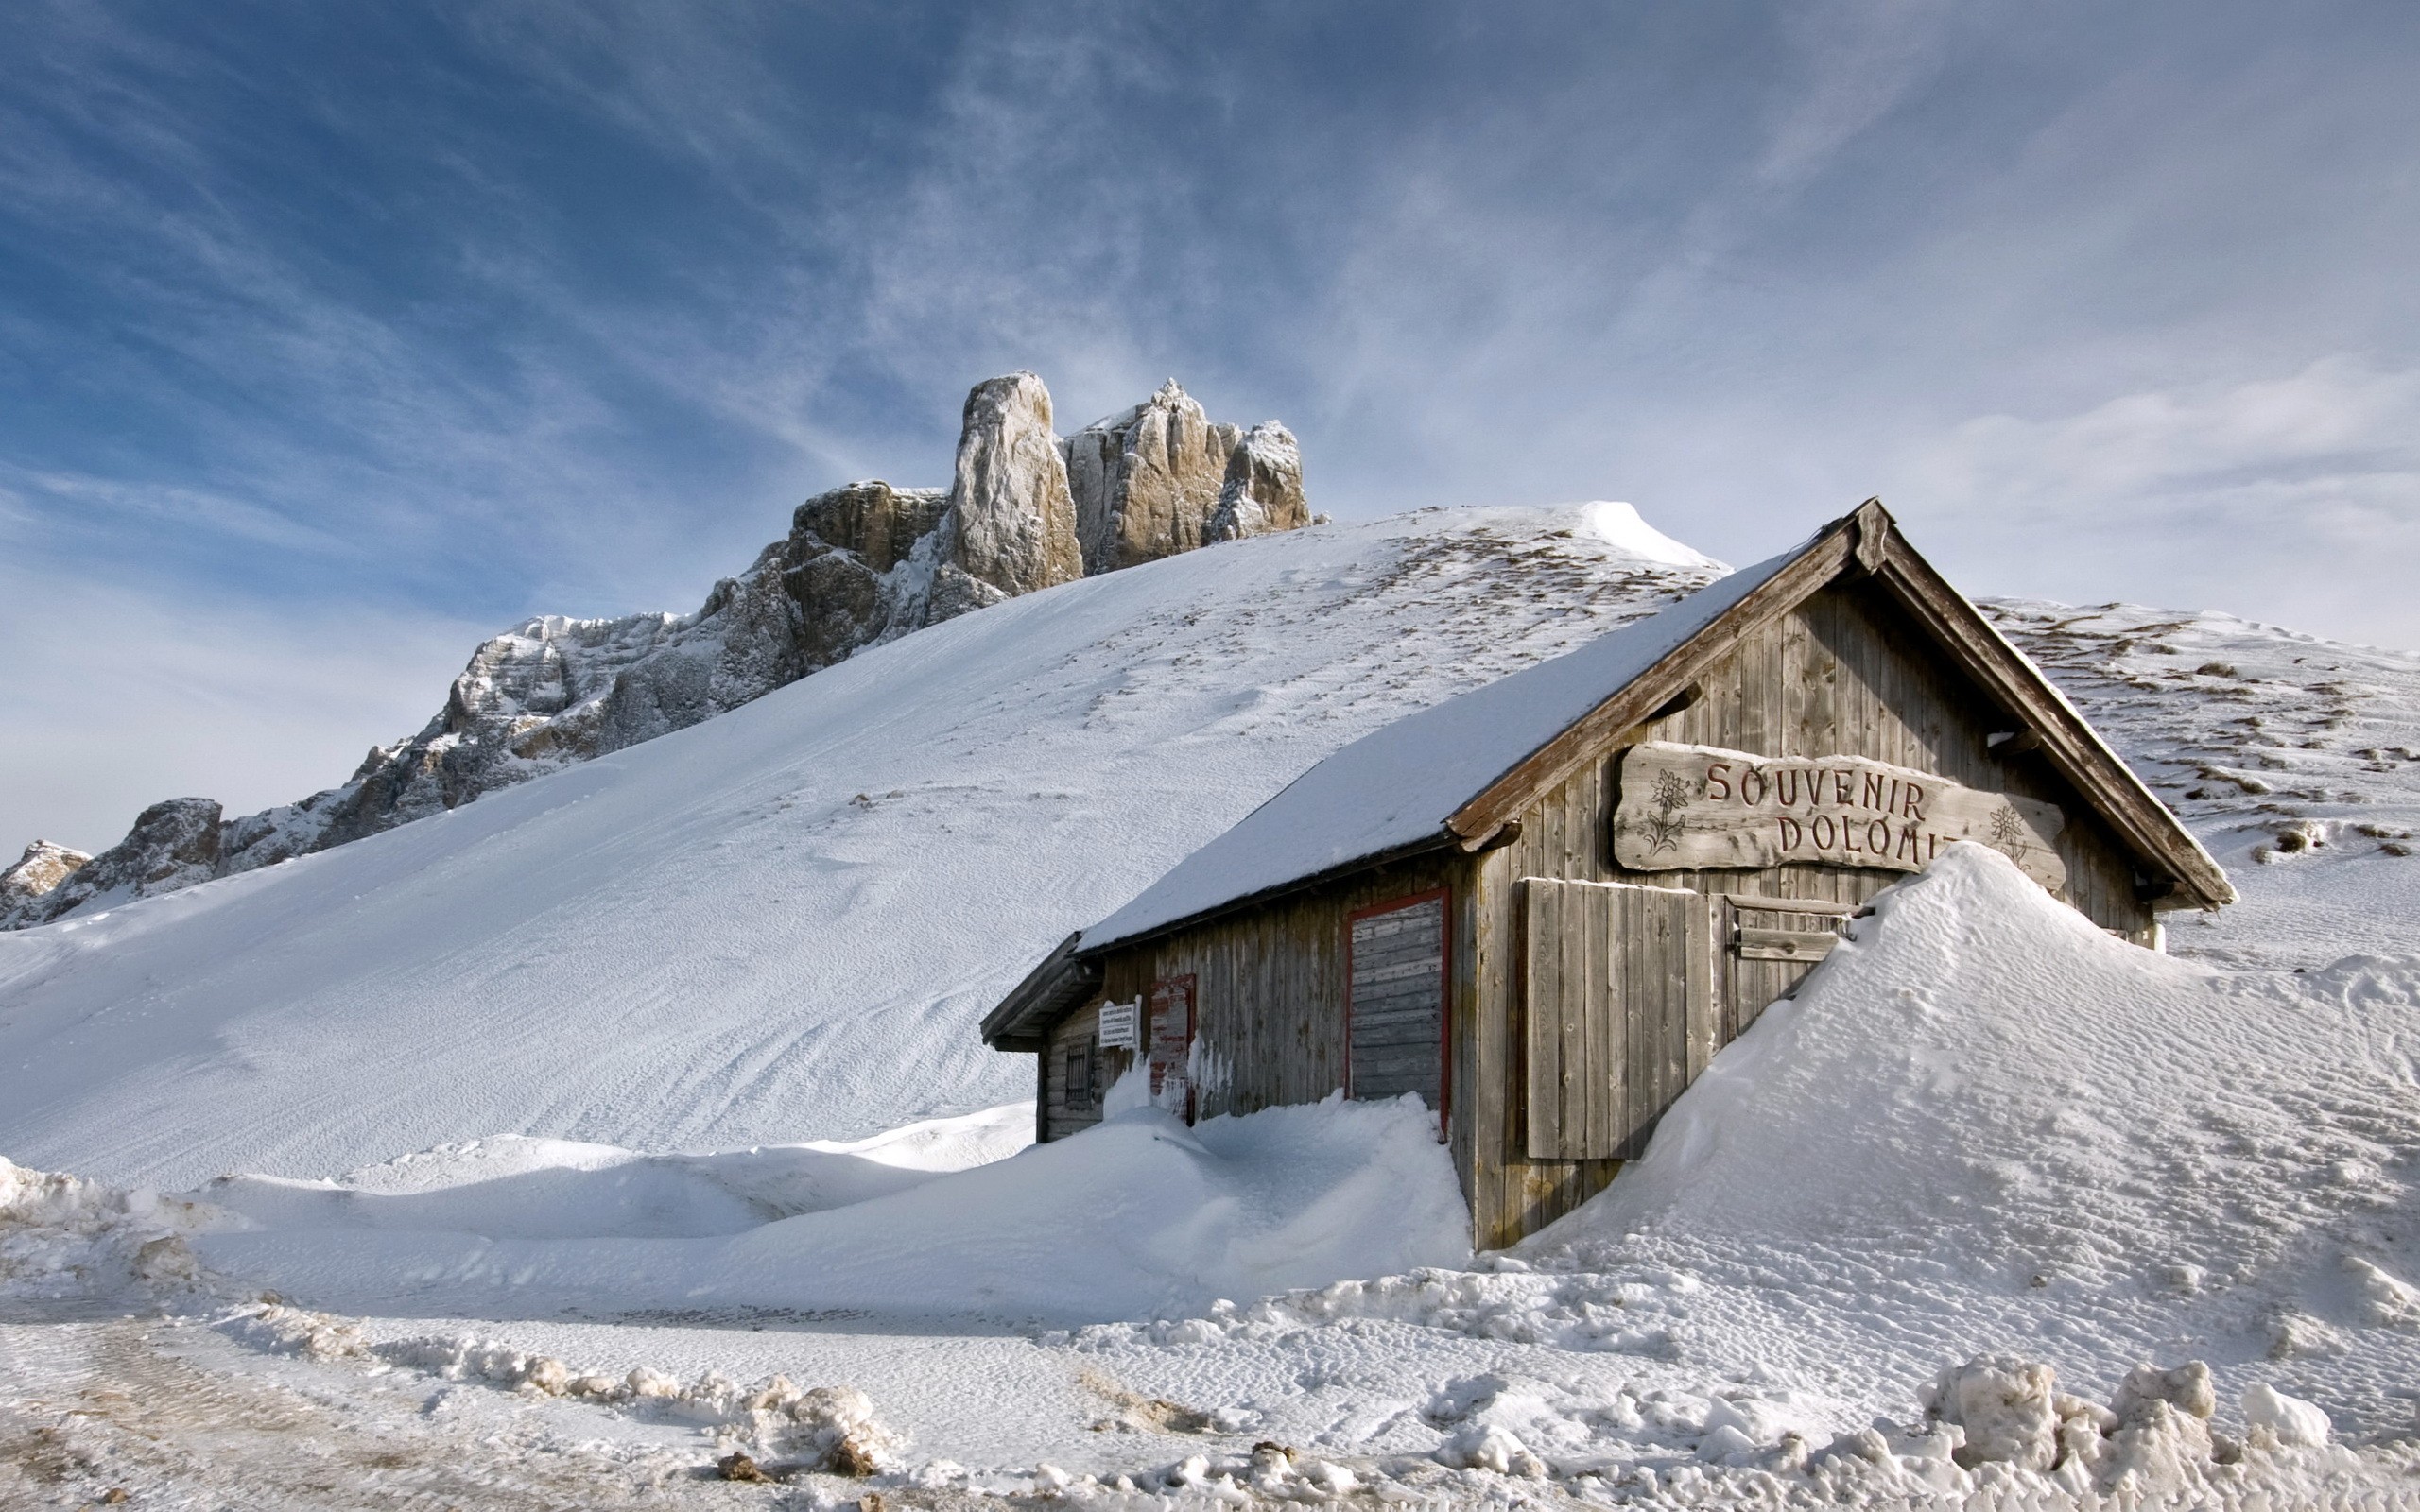 General 2560x1600 landscape snow mountains Italy Dolomites nature hut rocks cold ice